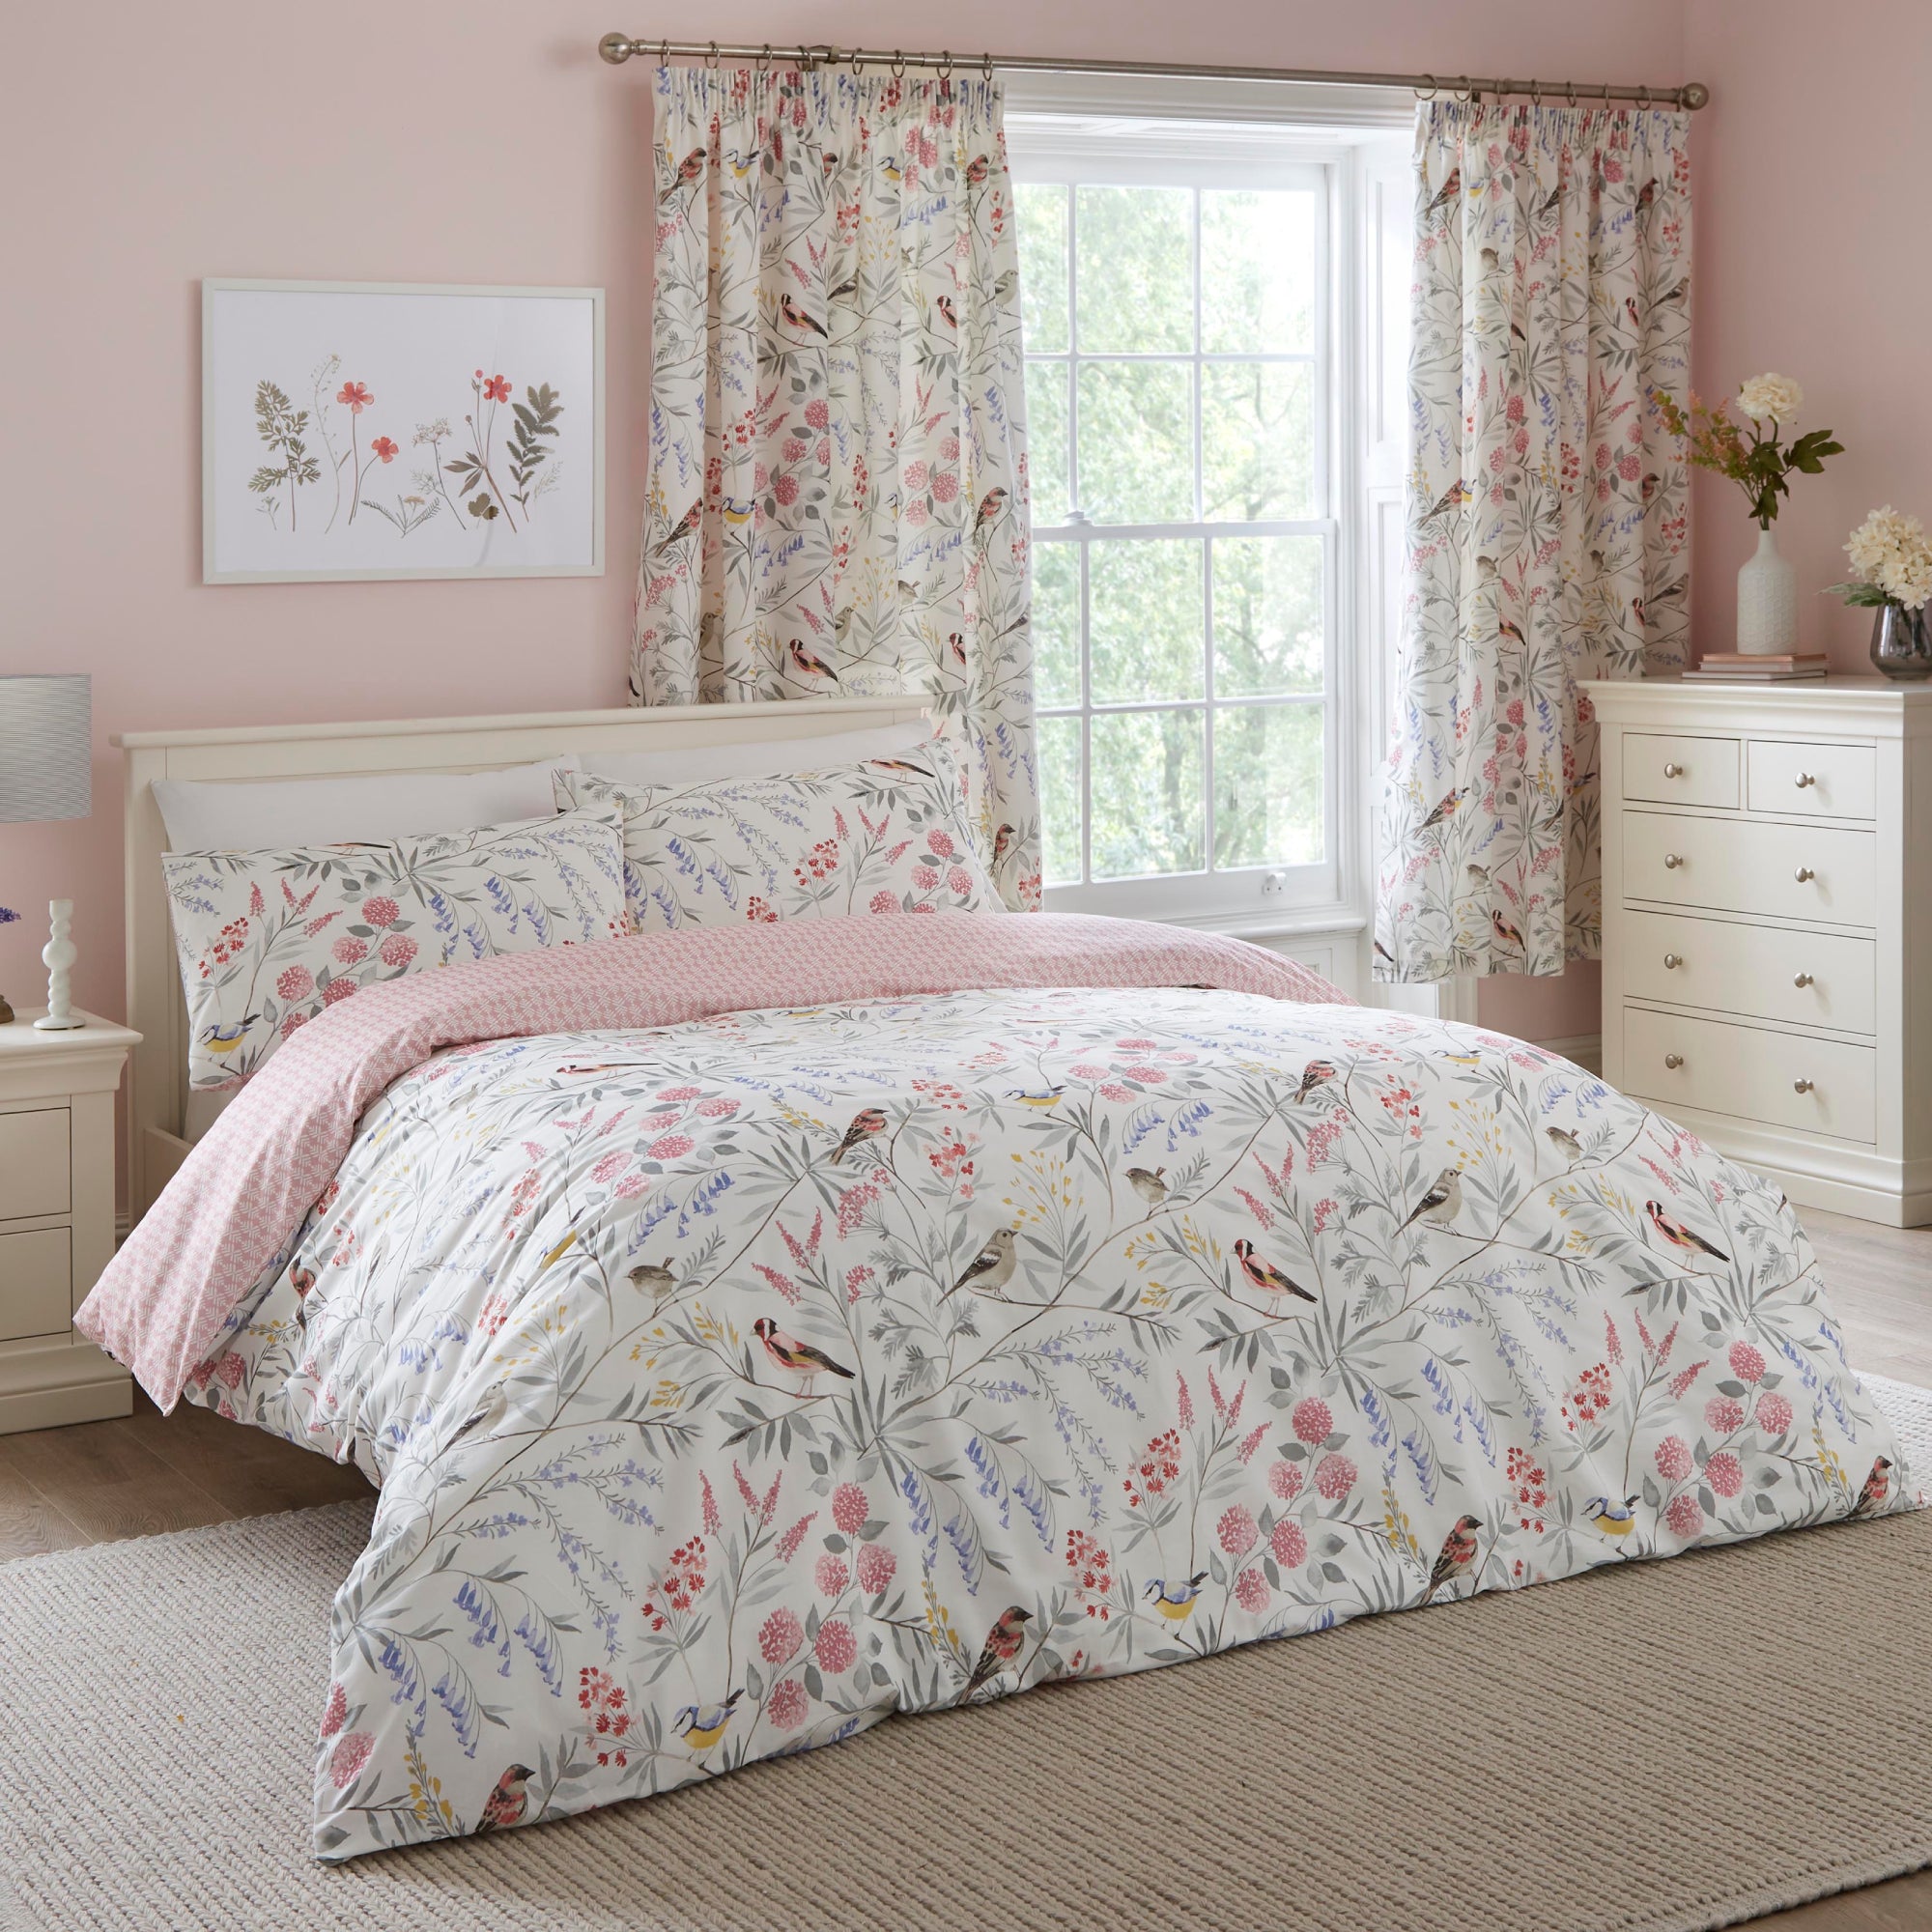 Duvet Cover Set Caraway by Dreams & Drapes Design in Pink